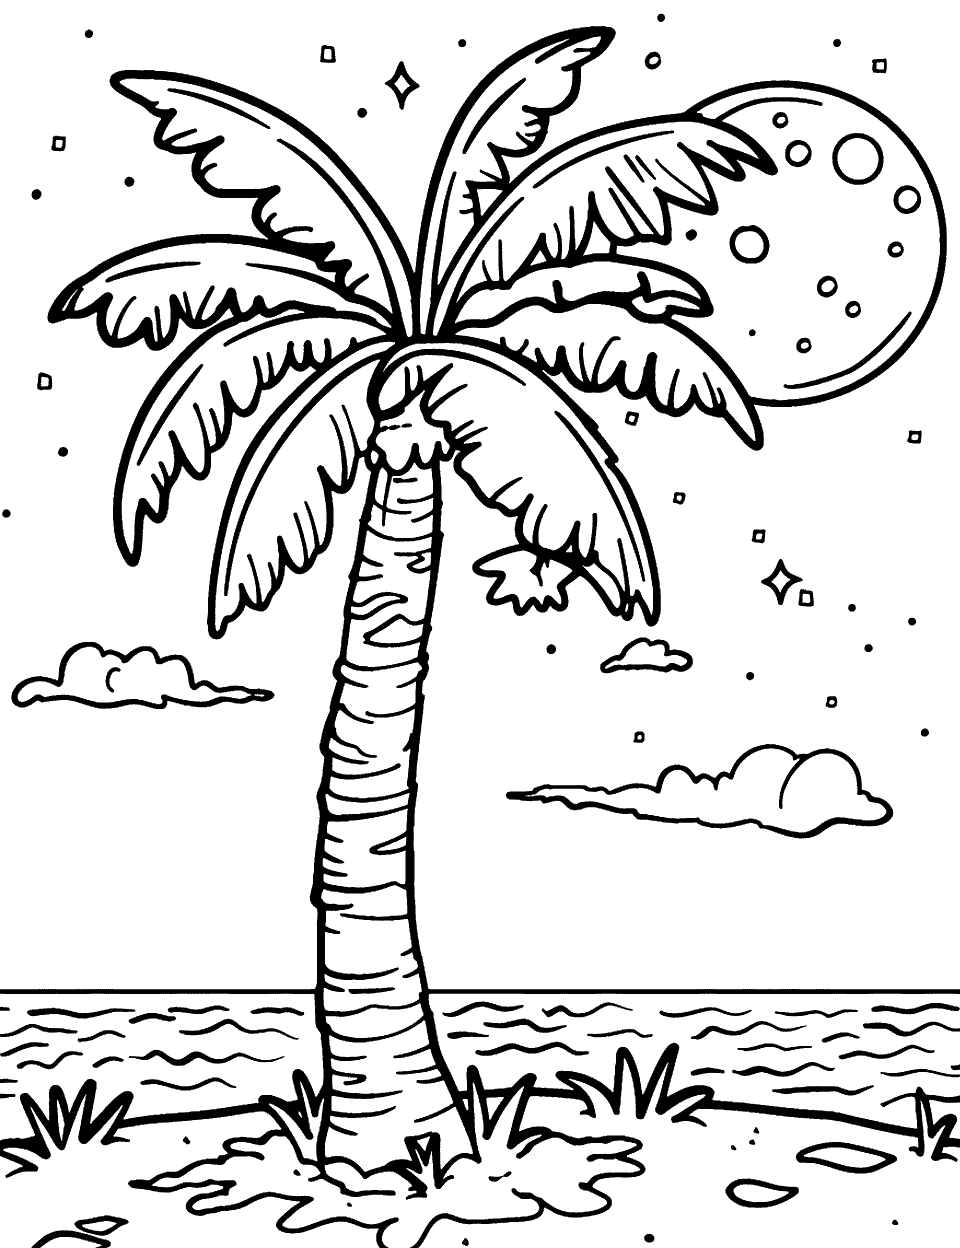 Moonlit Palm Tree Coloring Page - A palm tree under a full moon.